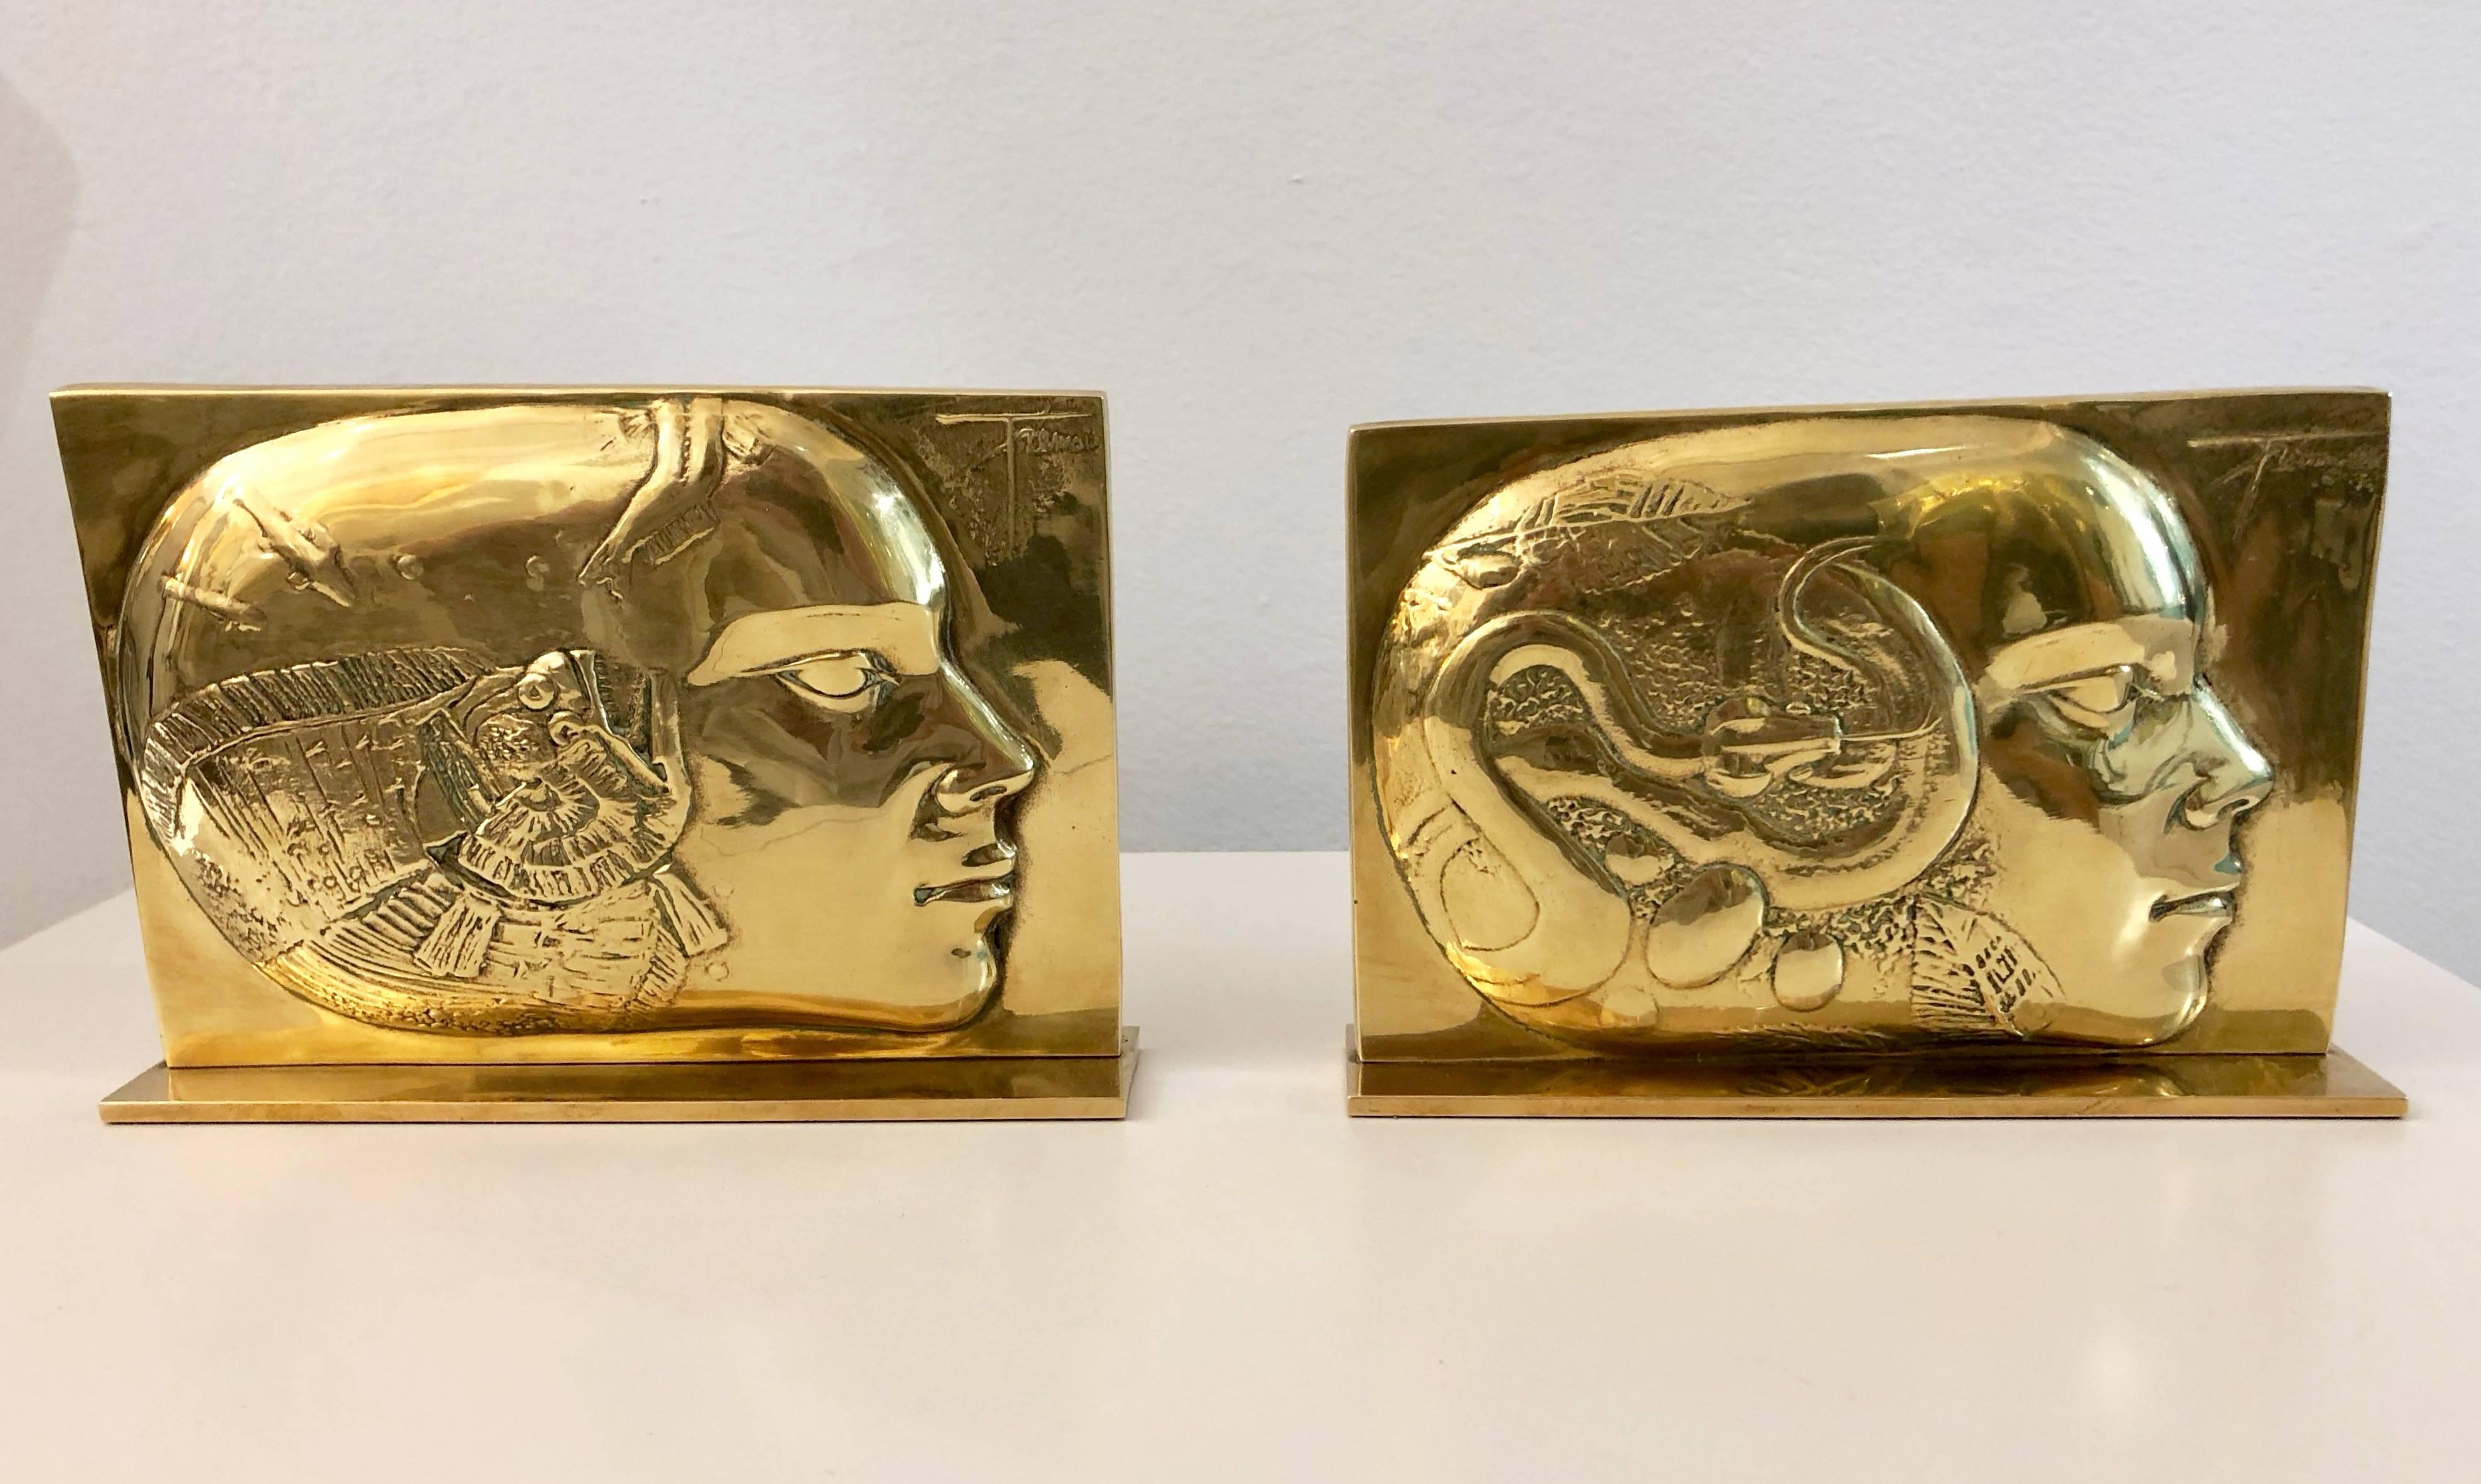 Expressive modern French Work of Art signed by the artist, pair of finely detailed gold color bronze sculptures representing a low relief panel with two different feminine profiles, one with a fish and the other with a snake, intricately chased as